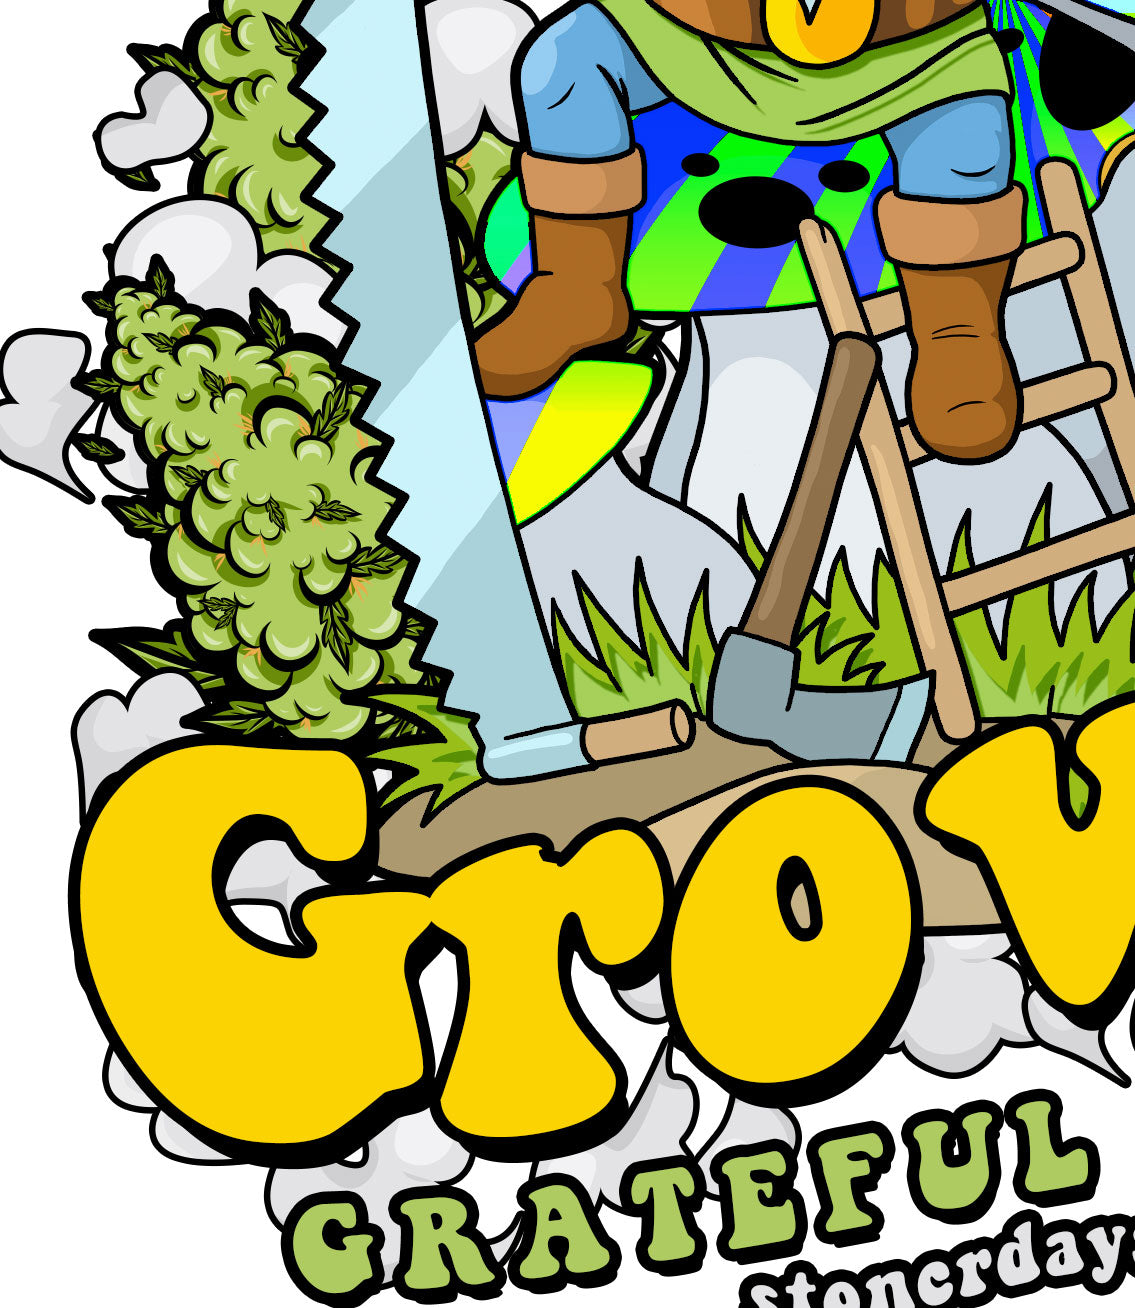 StonerDays Gnome Grown White Tee close-up graphic with vibrant colors on cotton